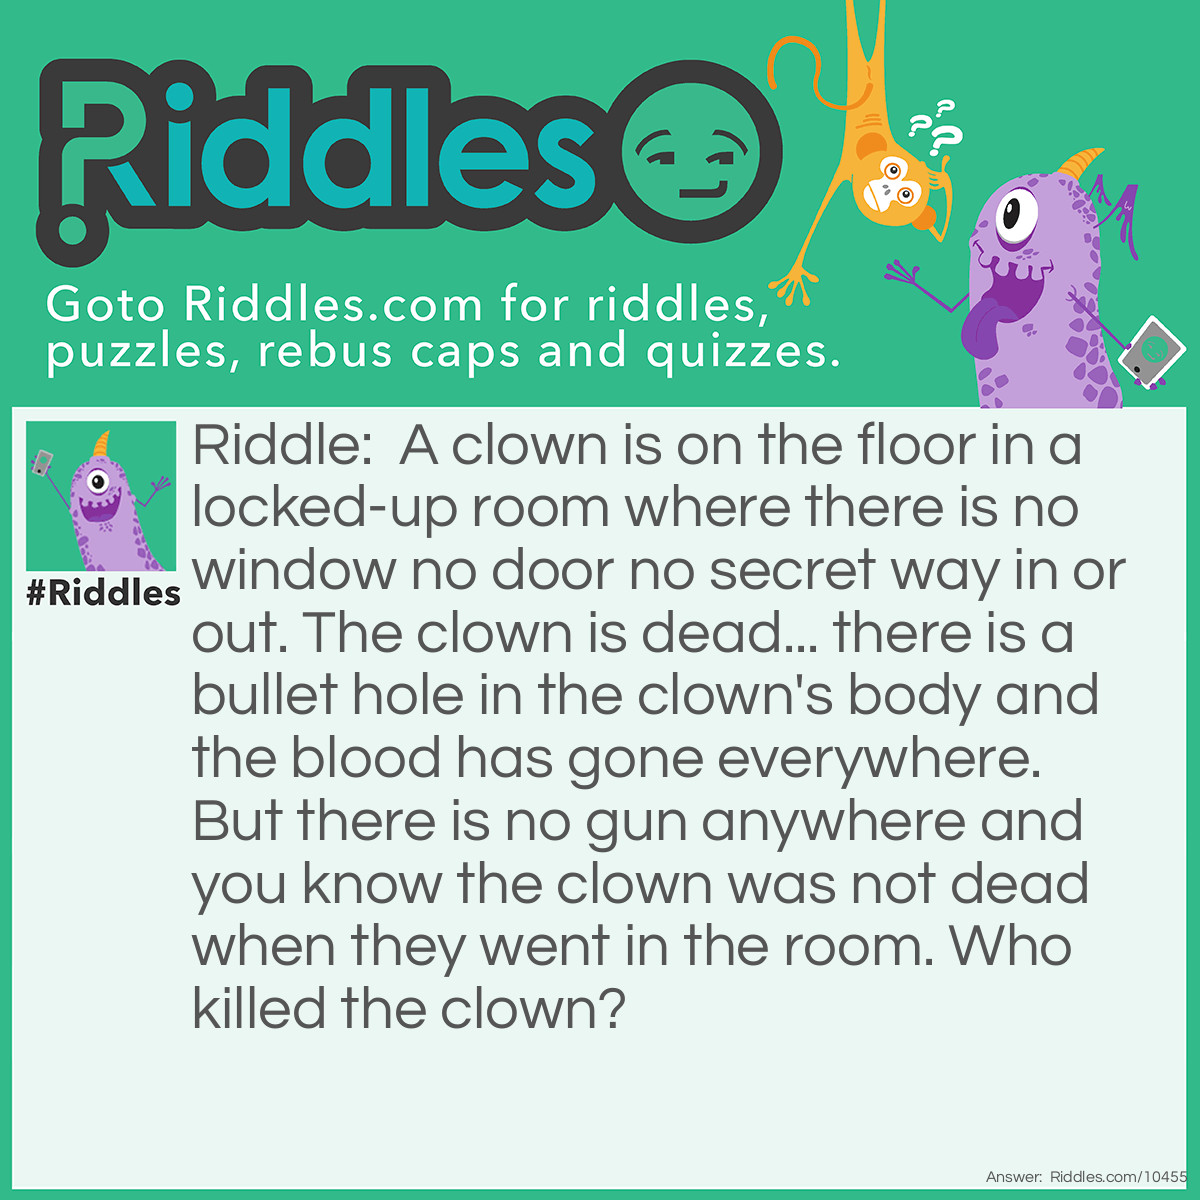 Riddle: A clown is on the floor in a locked-up room where there is no window no door no secret way in or out. The clown is dead... there is a bullet hole in the clown's body and the blood has gone everywhere. But there is no gun anywhere and you know the clown was not dead when they went in the room. Who killed the clown? Answer: The clown is actually not a clown but a gun swallower which is like a sword swallower but with a gun, not a sword. The clown had gone in the room when they had swallowed the gun but then the clown needed to burp and the burp made the gun go off inside the clown which killed the clown. Nobody killed the clown (unless the burp is someone) and the gun was inside the clown all along!